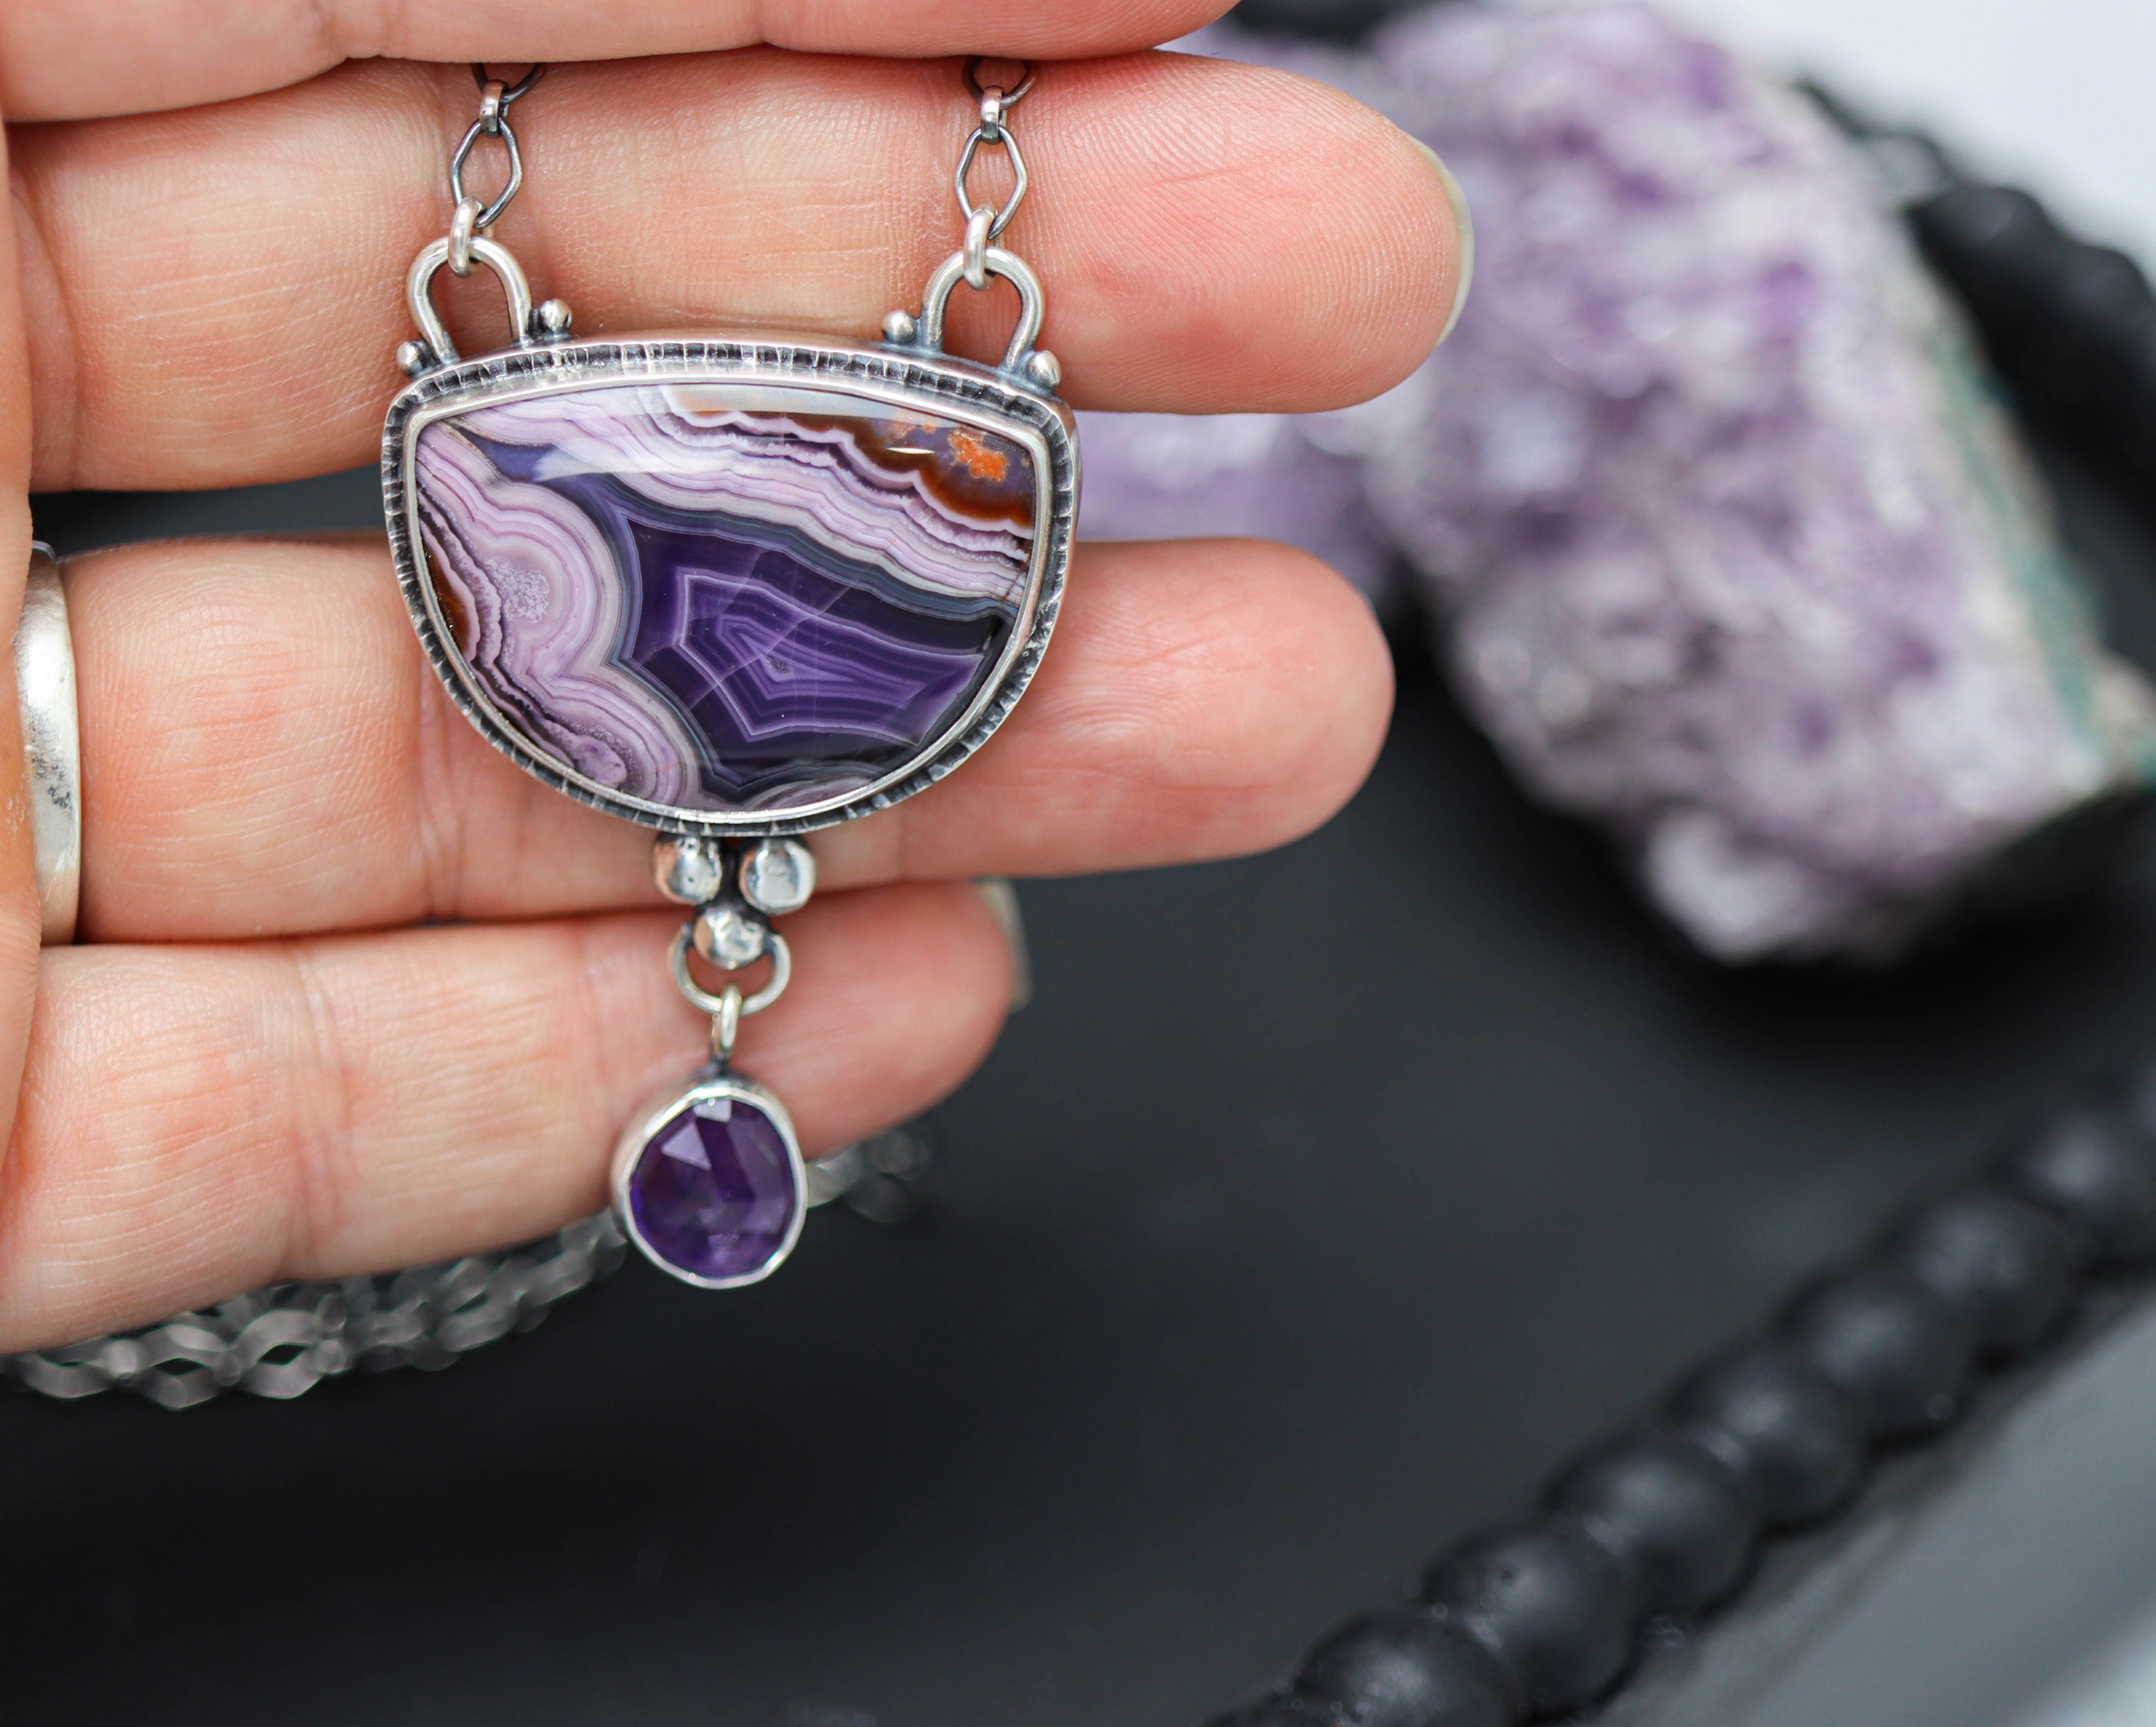 Purple Passion Agate and Amethyst Pendant Necklace